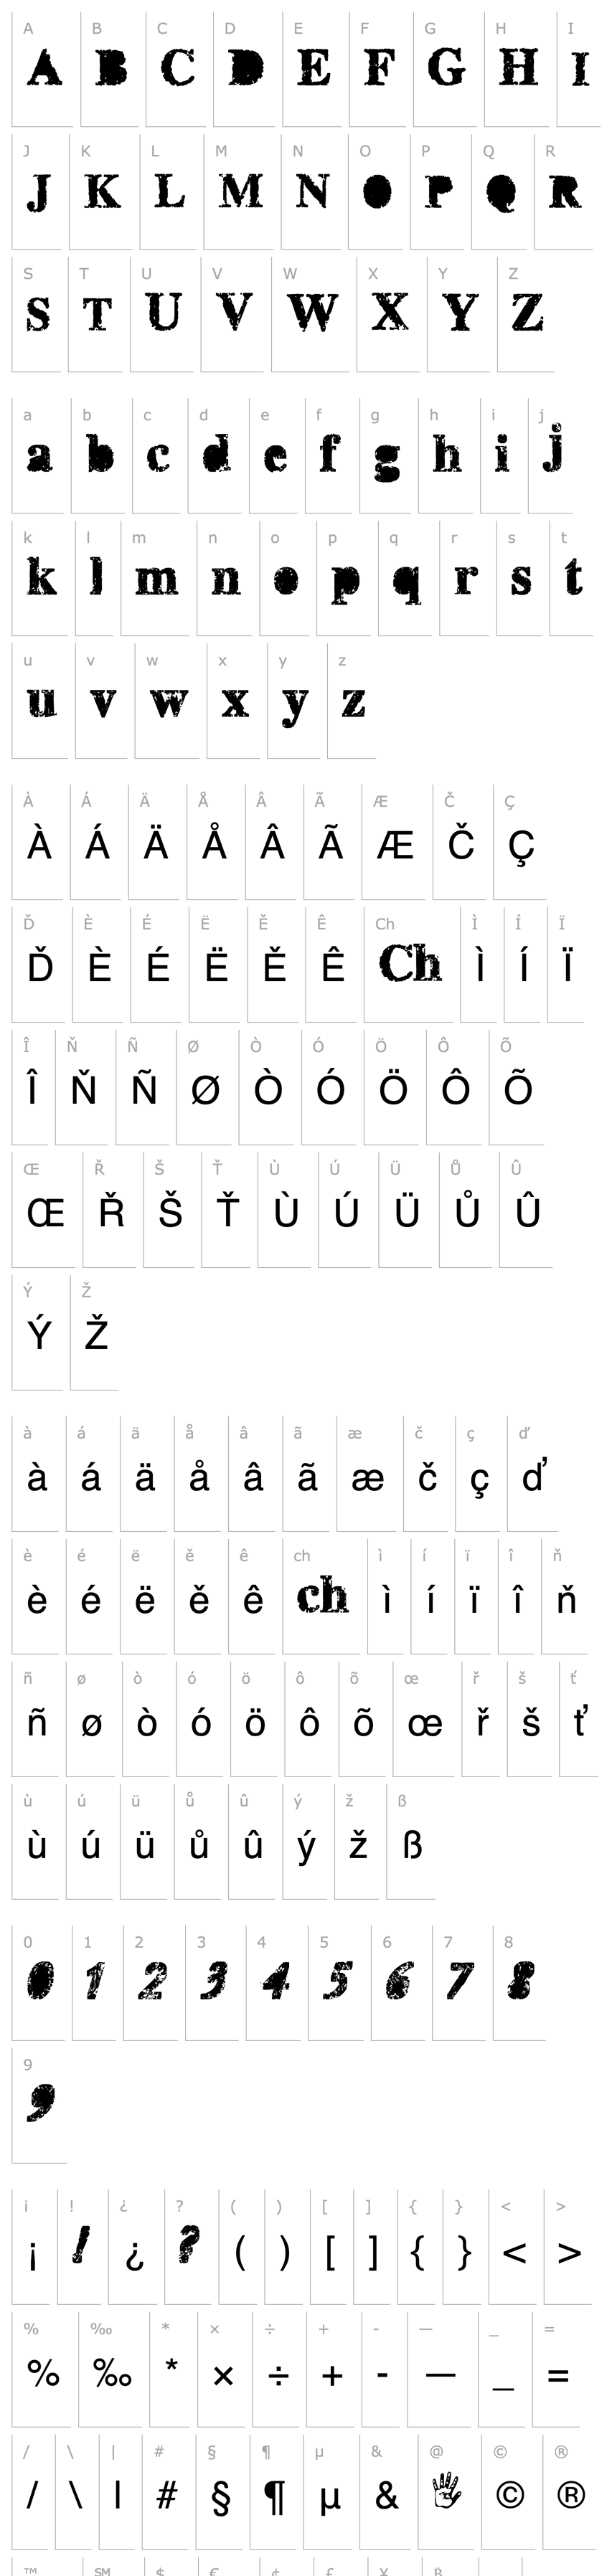 Overview misprinted type